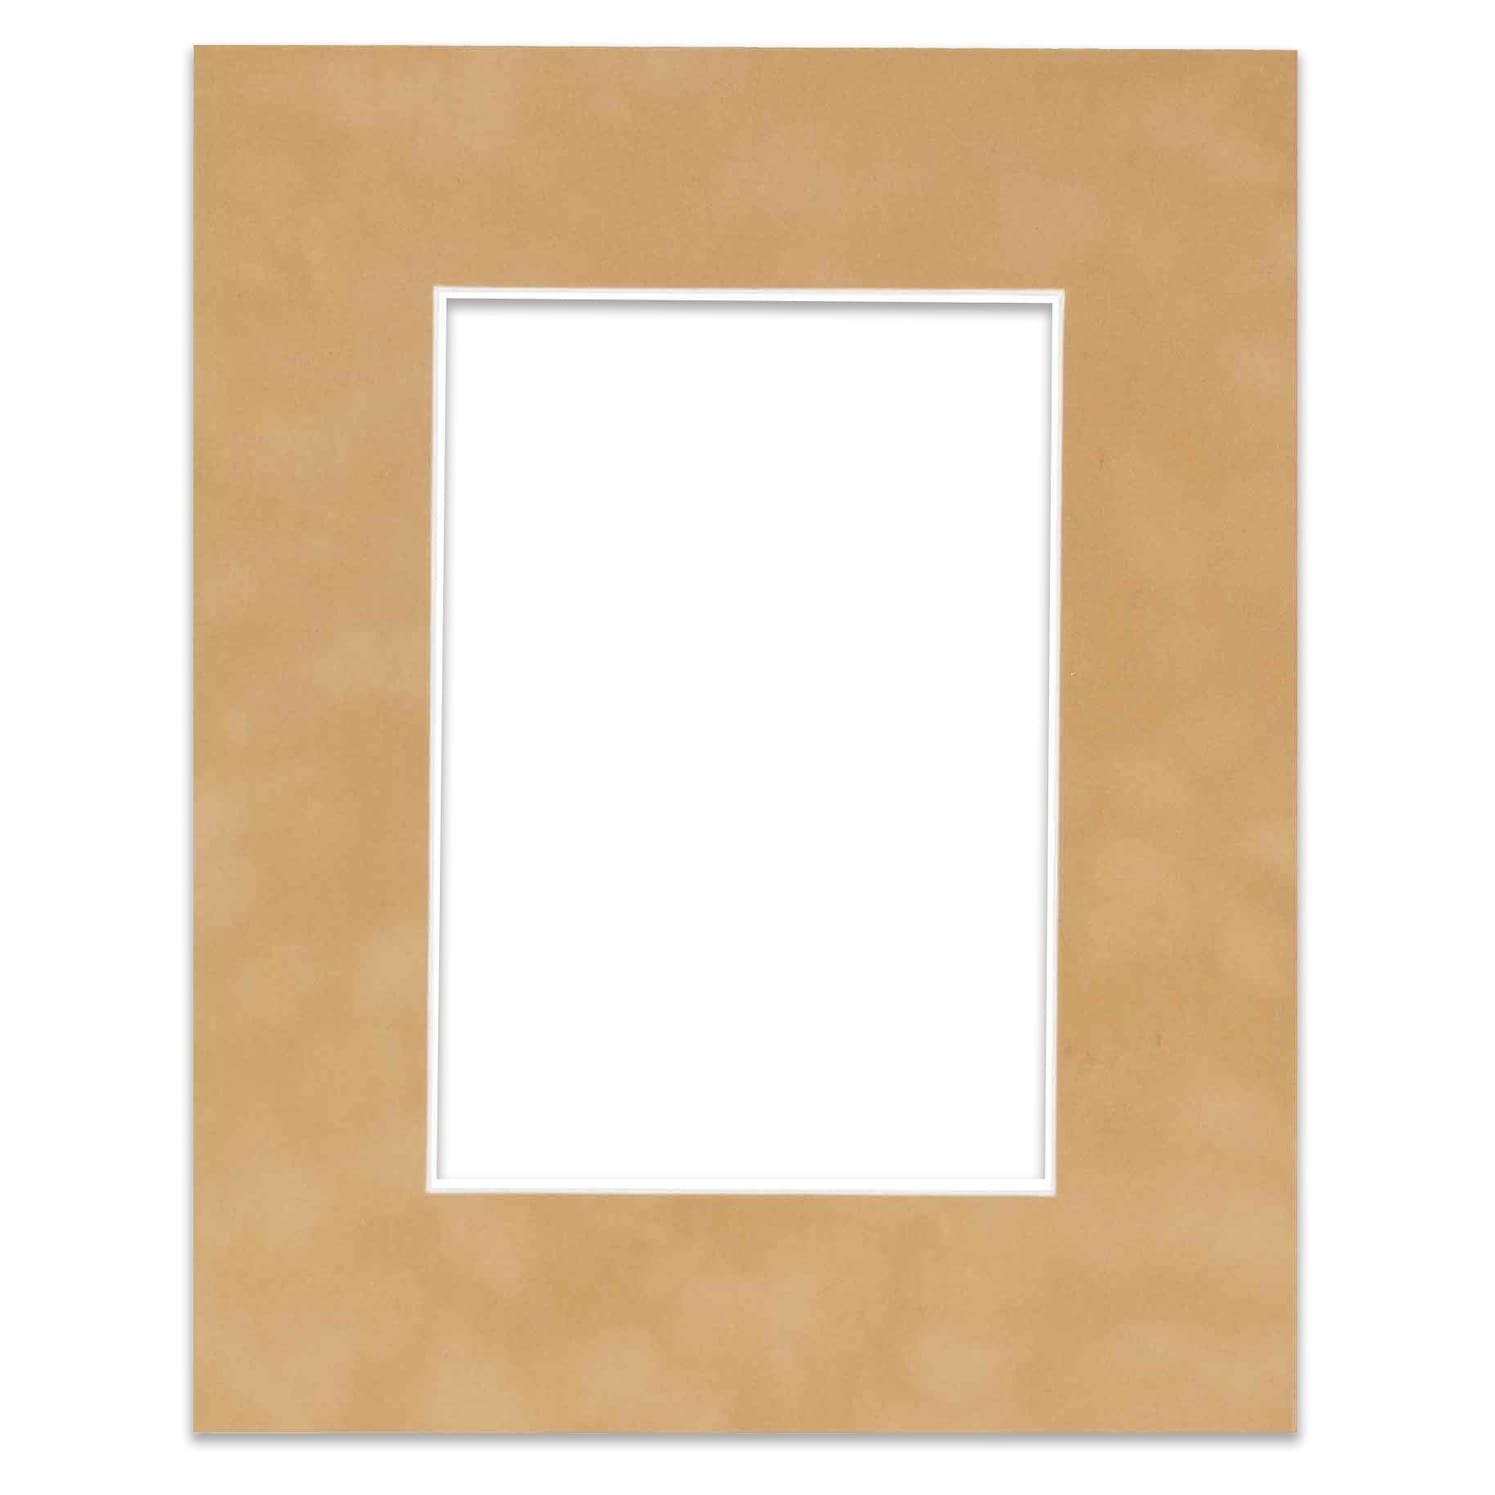  30x30 Frame Beige Real Wood Picture Frame Width 0.75 Inches, Interior Frame Depth 0.5 Inches